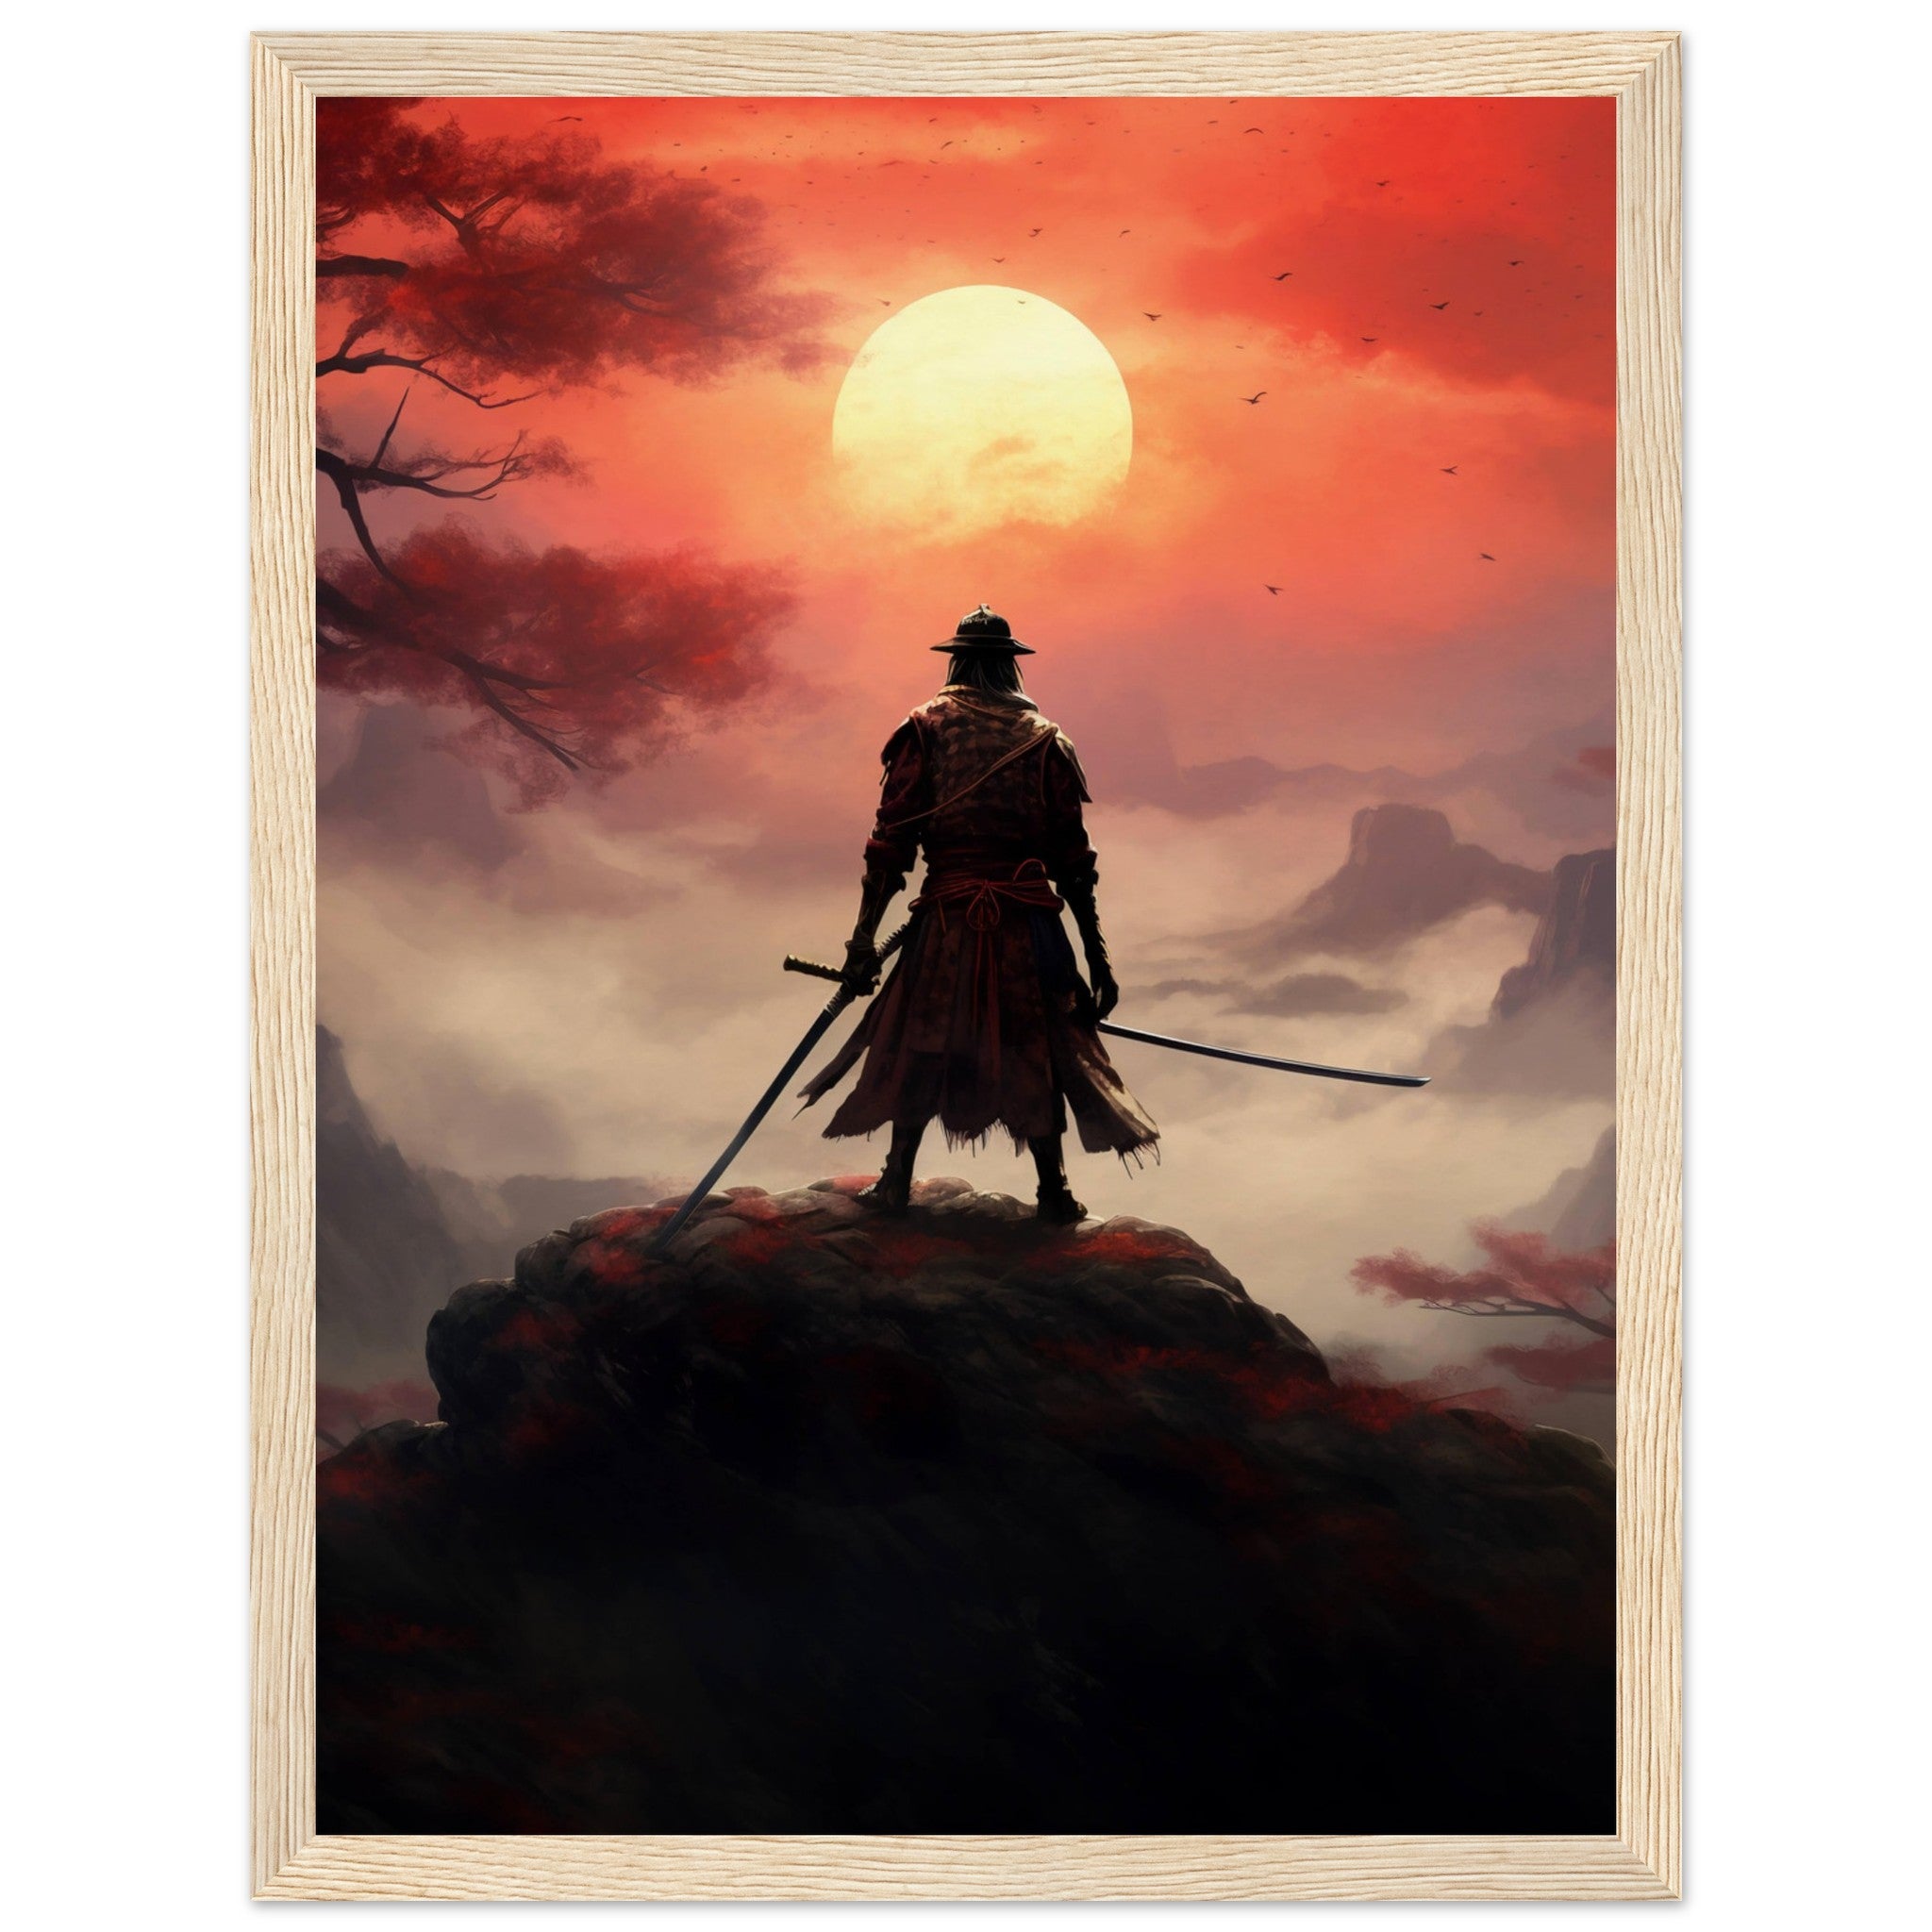 A samurai warrier looking at sunset - immersiarts